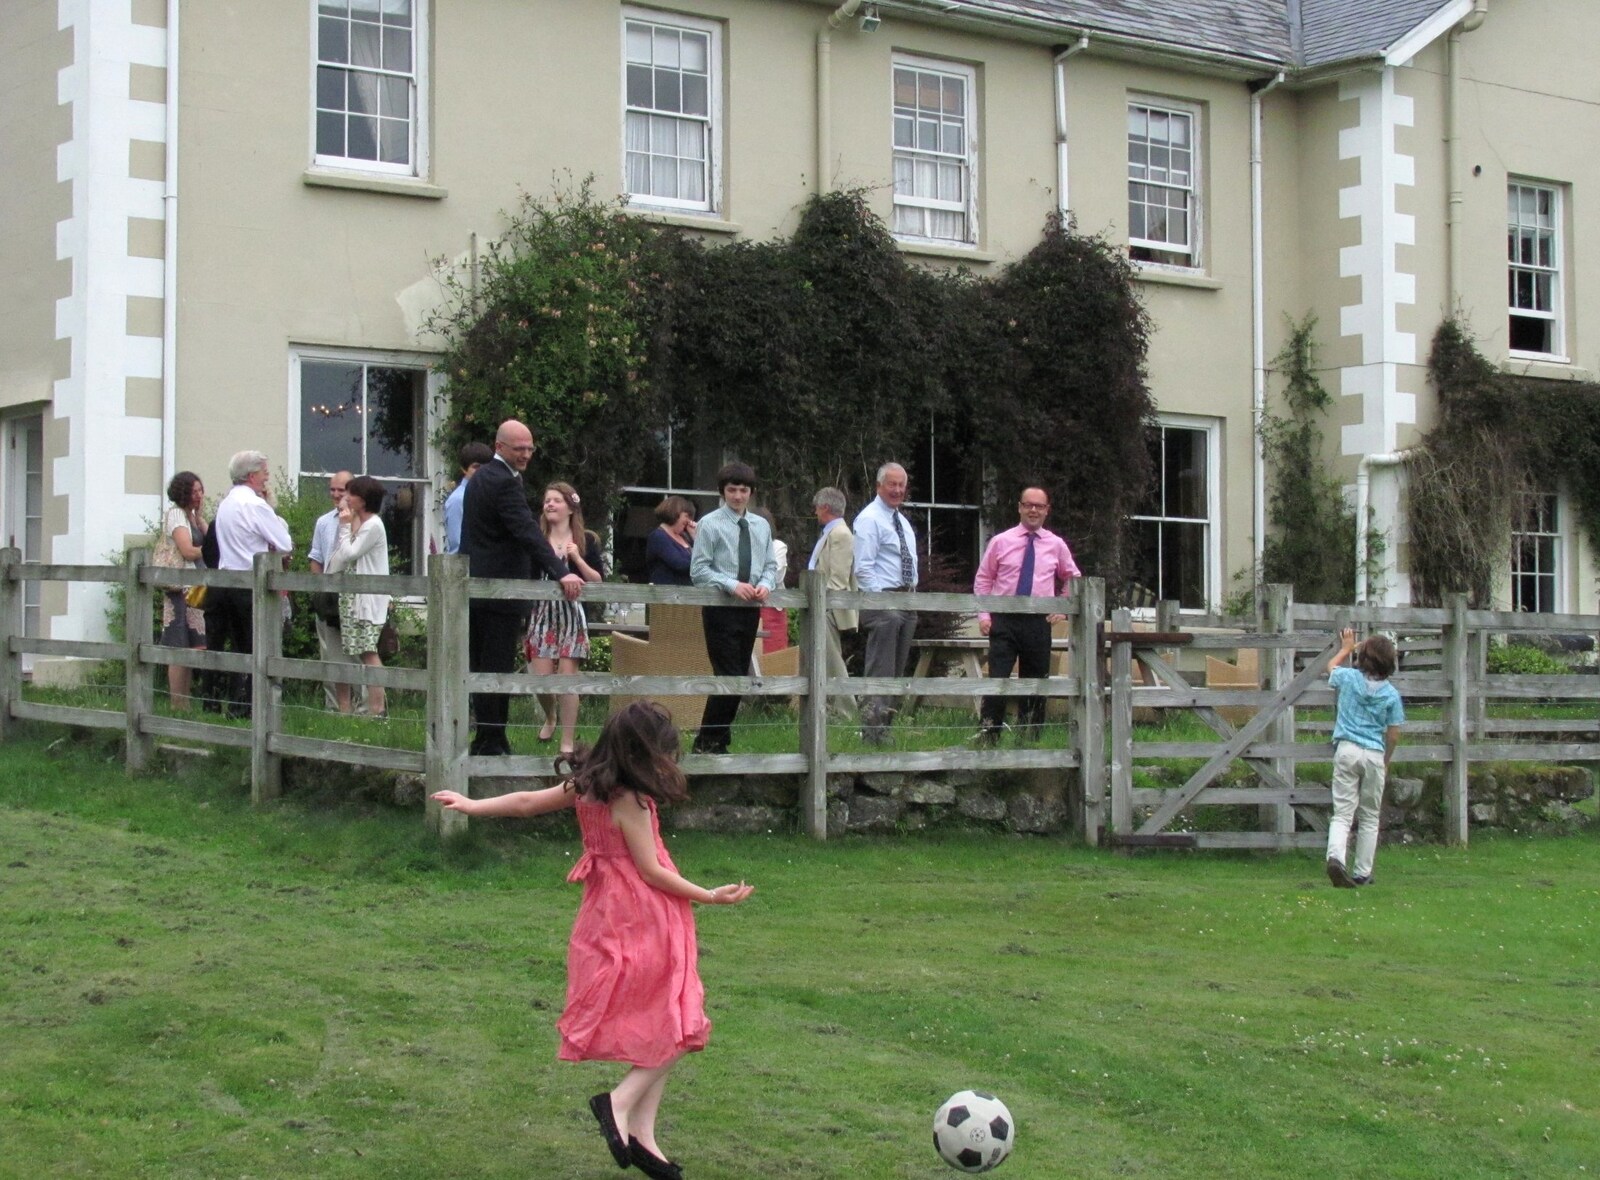 A spot of football is played from Mike's Memorial, Prince Hall Hotel, Two Bridges, Dartmoor - 12th July 2011